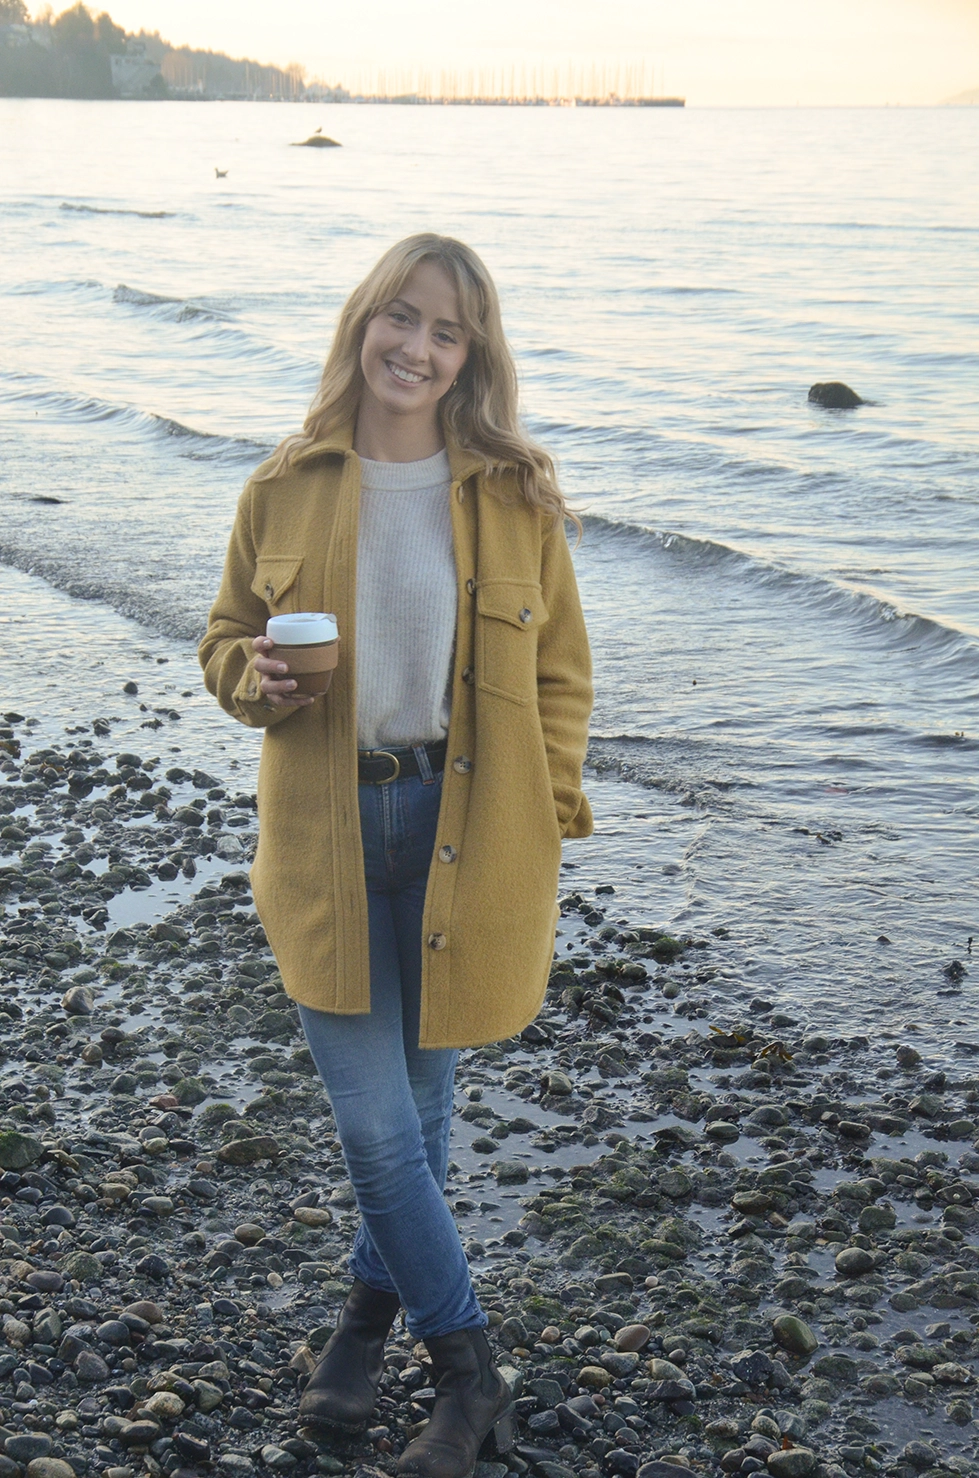 Photo of fleck founder Jazmin Welch in a yellow overcoat with sunshine coming behind her blond hair.